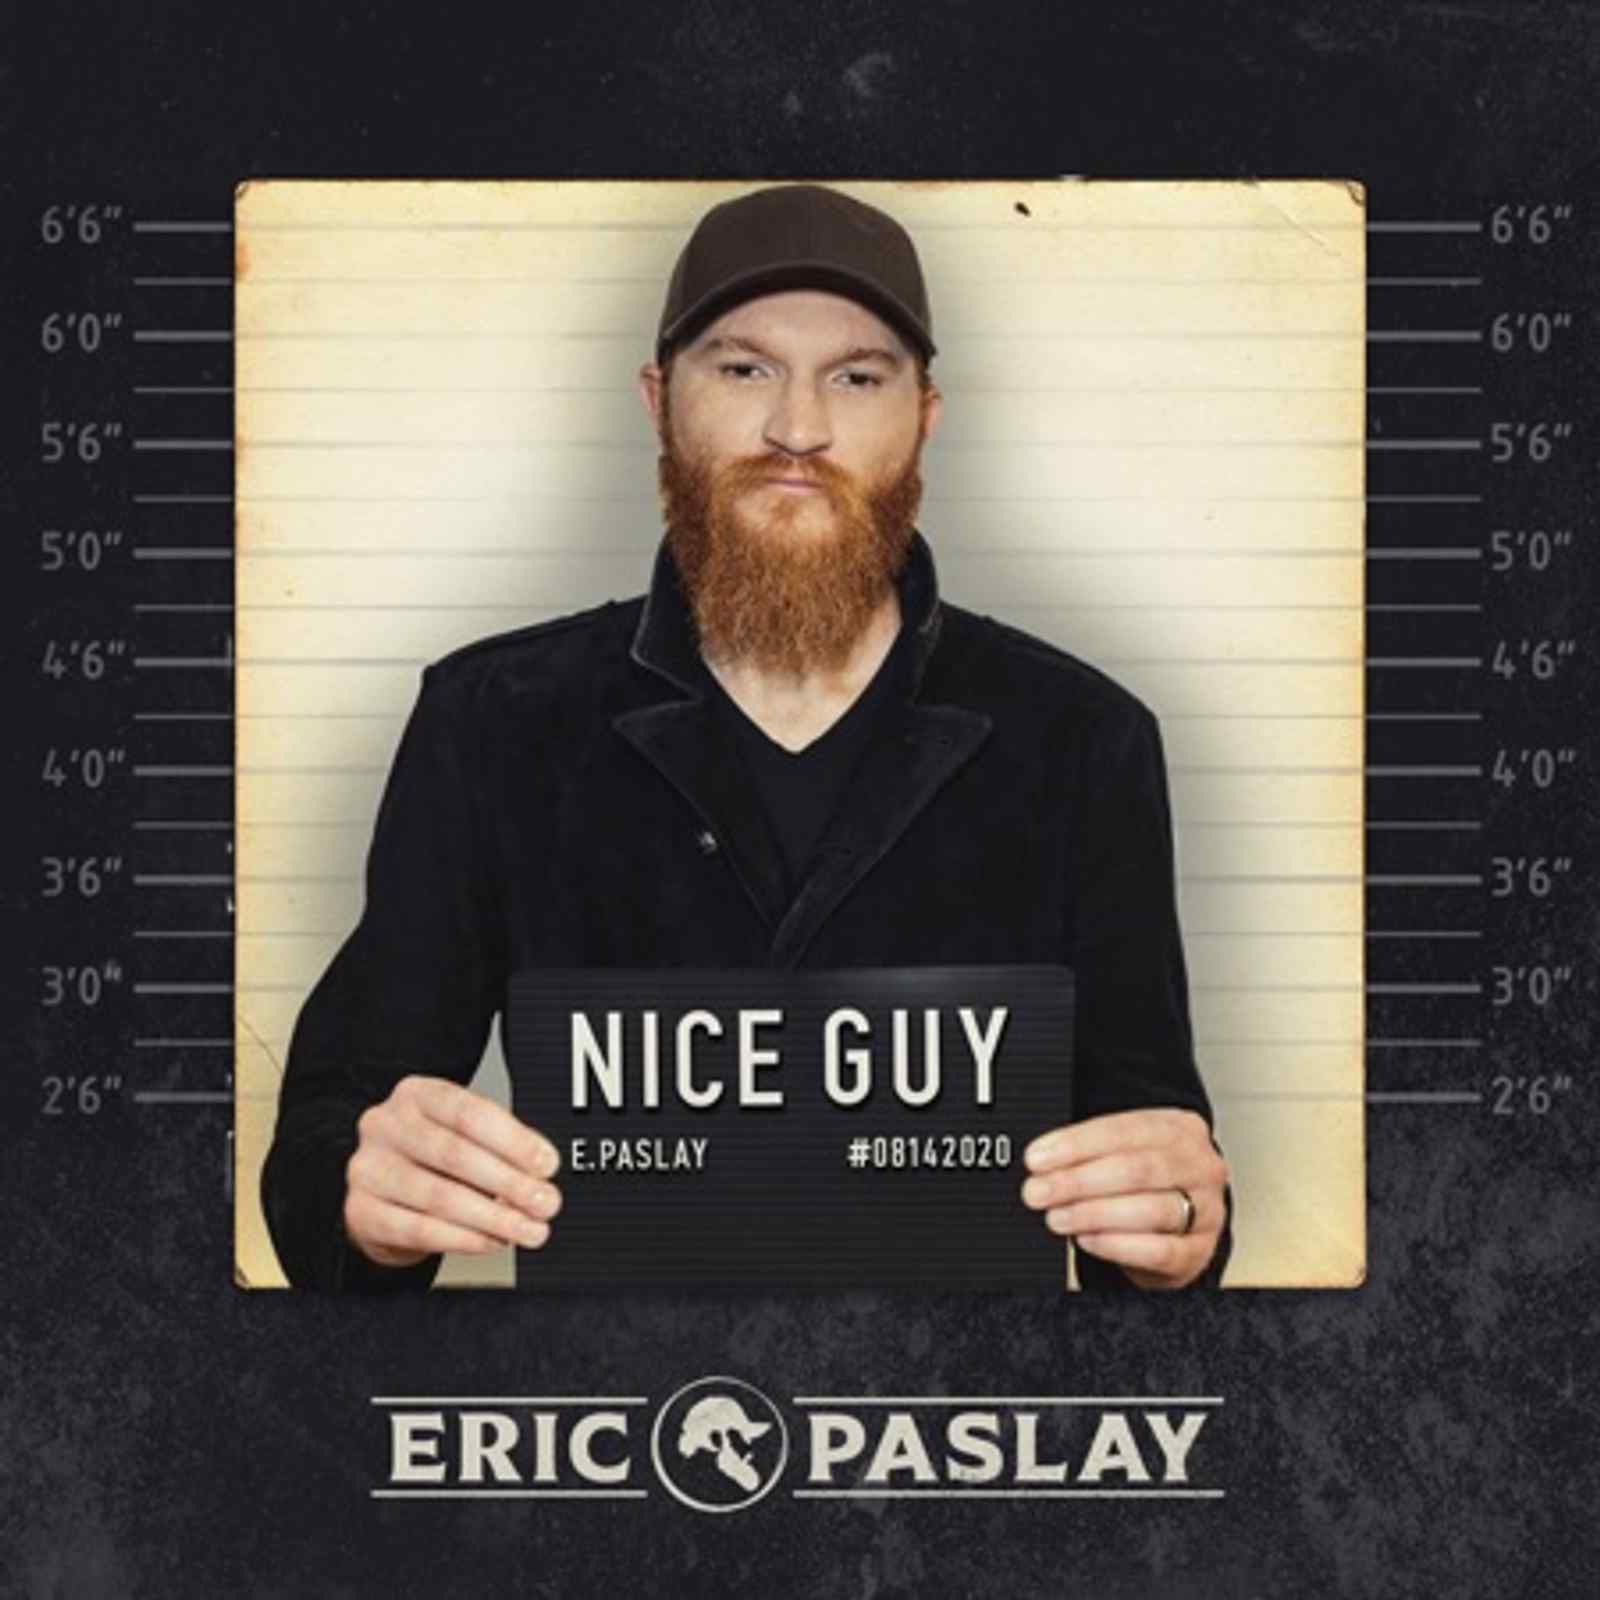 Song Release: "Nice Guy" by Eric Paslay